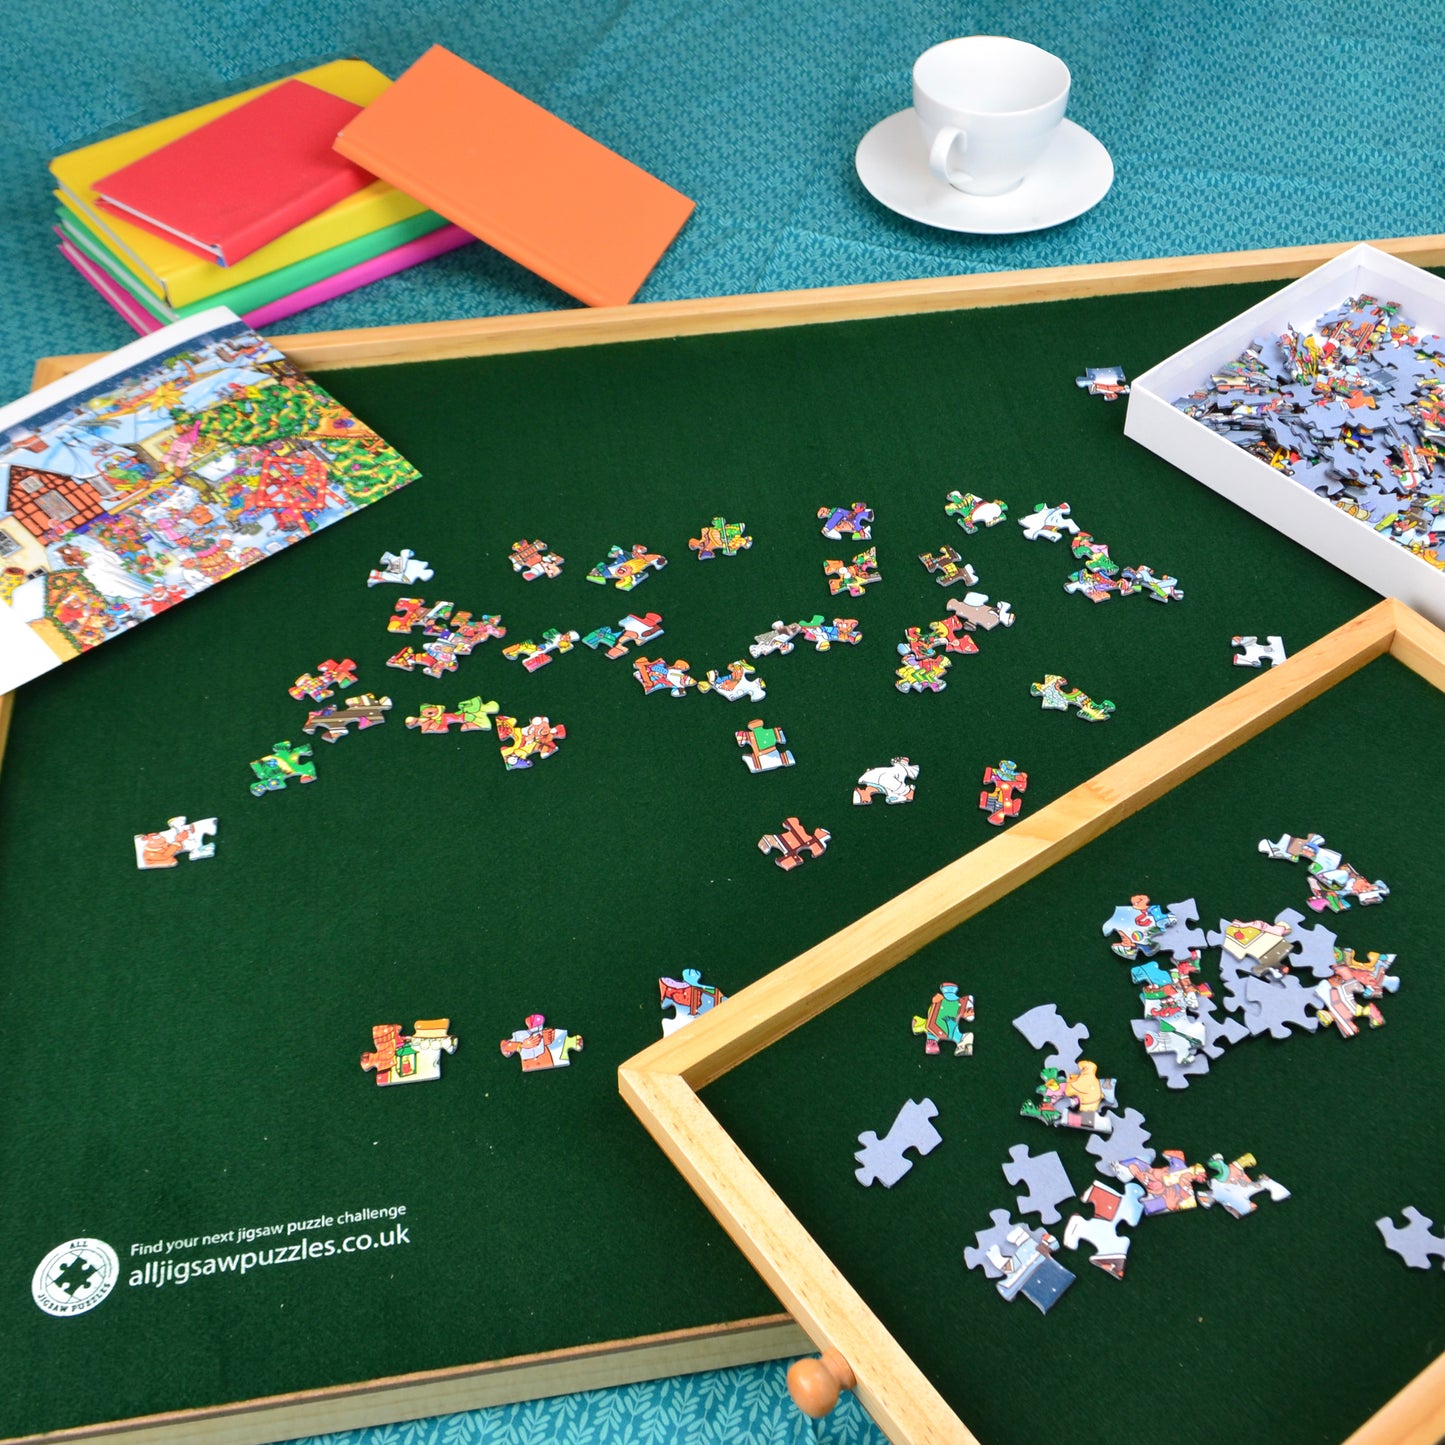 Wooden Jigsaw Puzzle Table- perfect gift for a puzzler